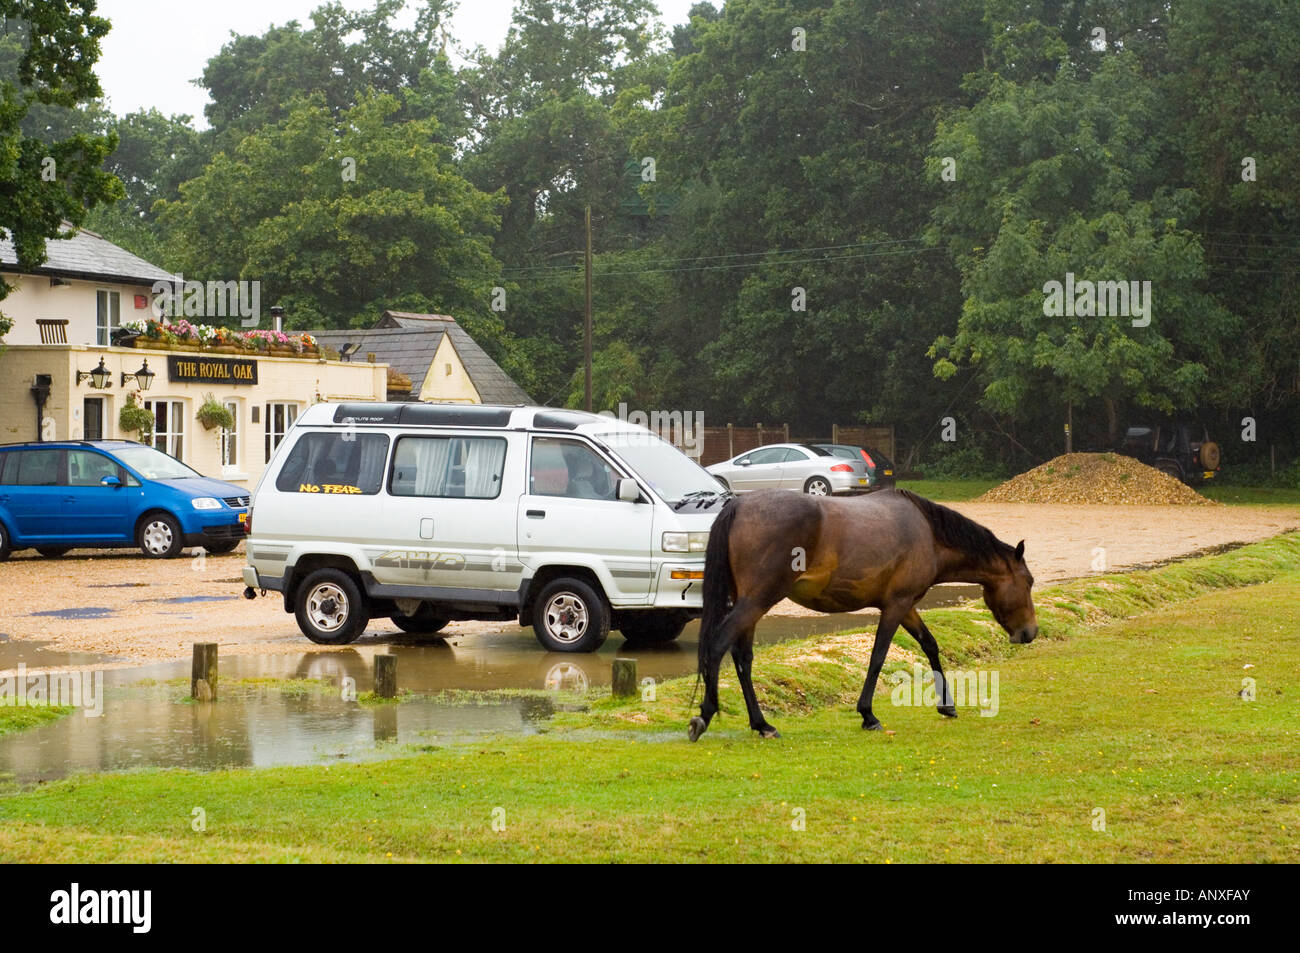 Horse and cars in the rain at the Royal Oak pub at Hilltop, near Beaulieu in the New Forest Stock Photo